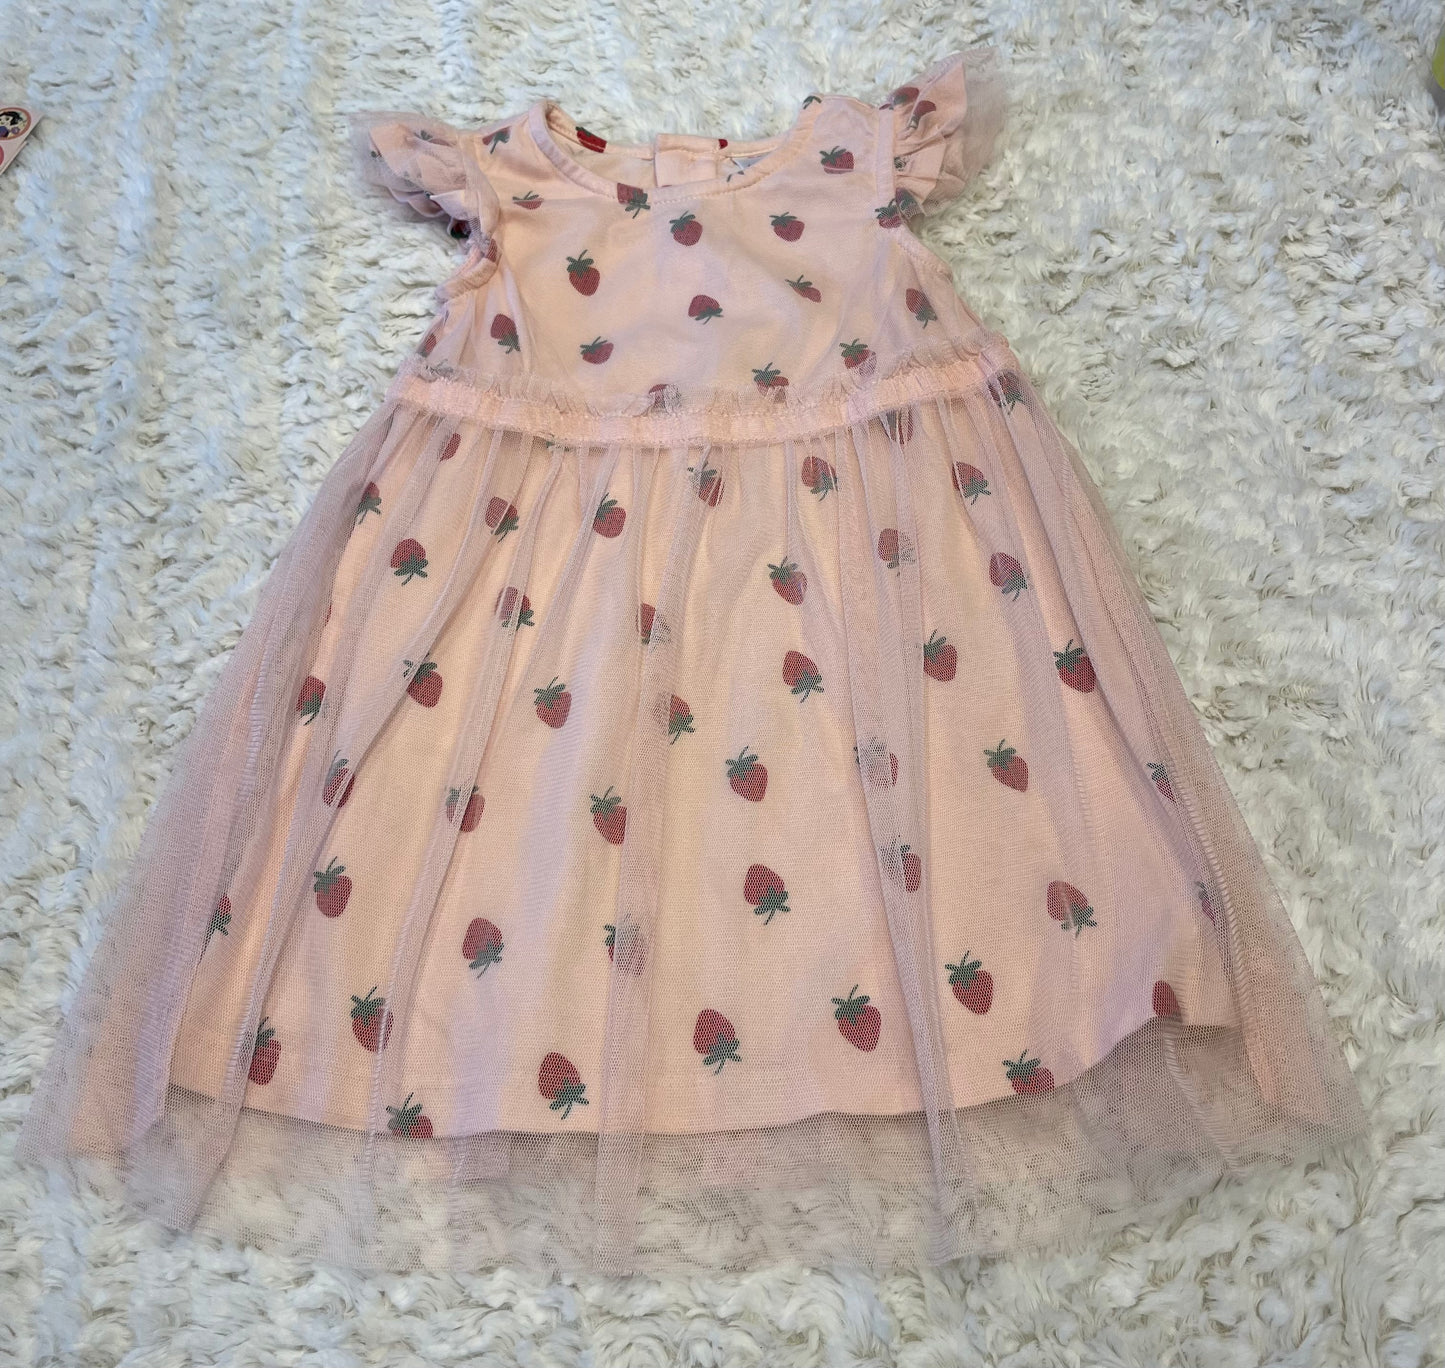 3T Hanna Andersson tulle dress. EUC washed but not worn